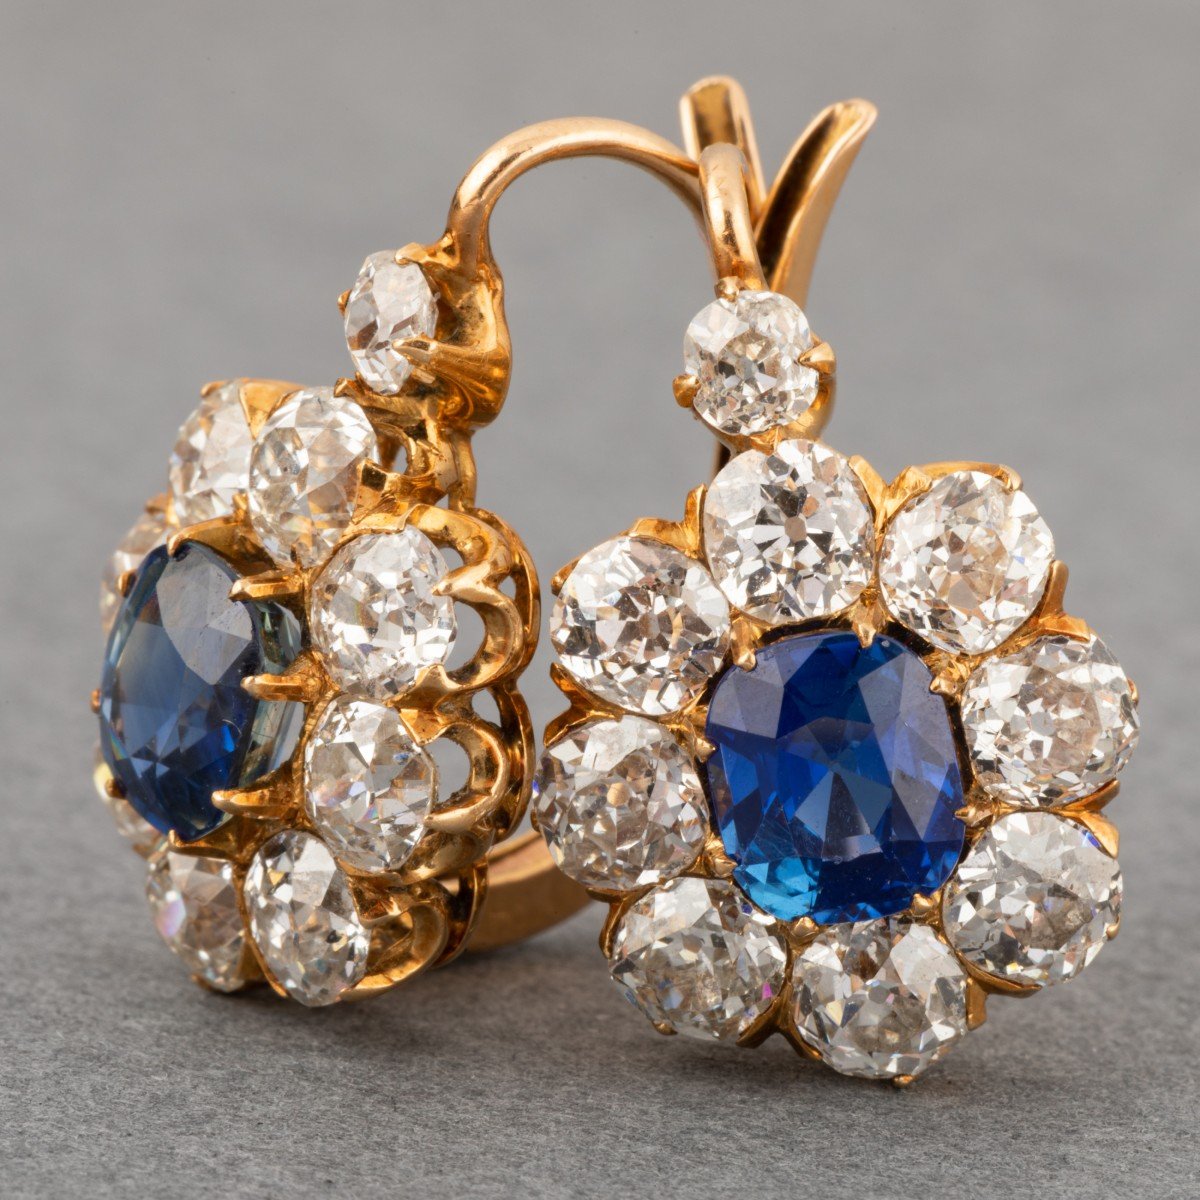 Antique Gold Diamond And Sapphire Earrings